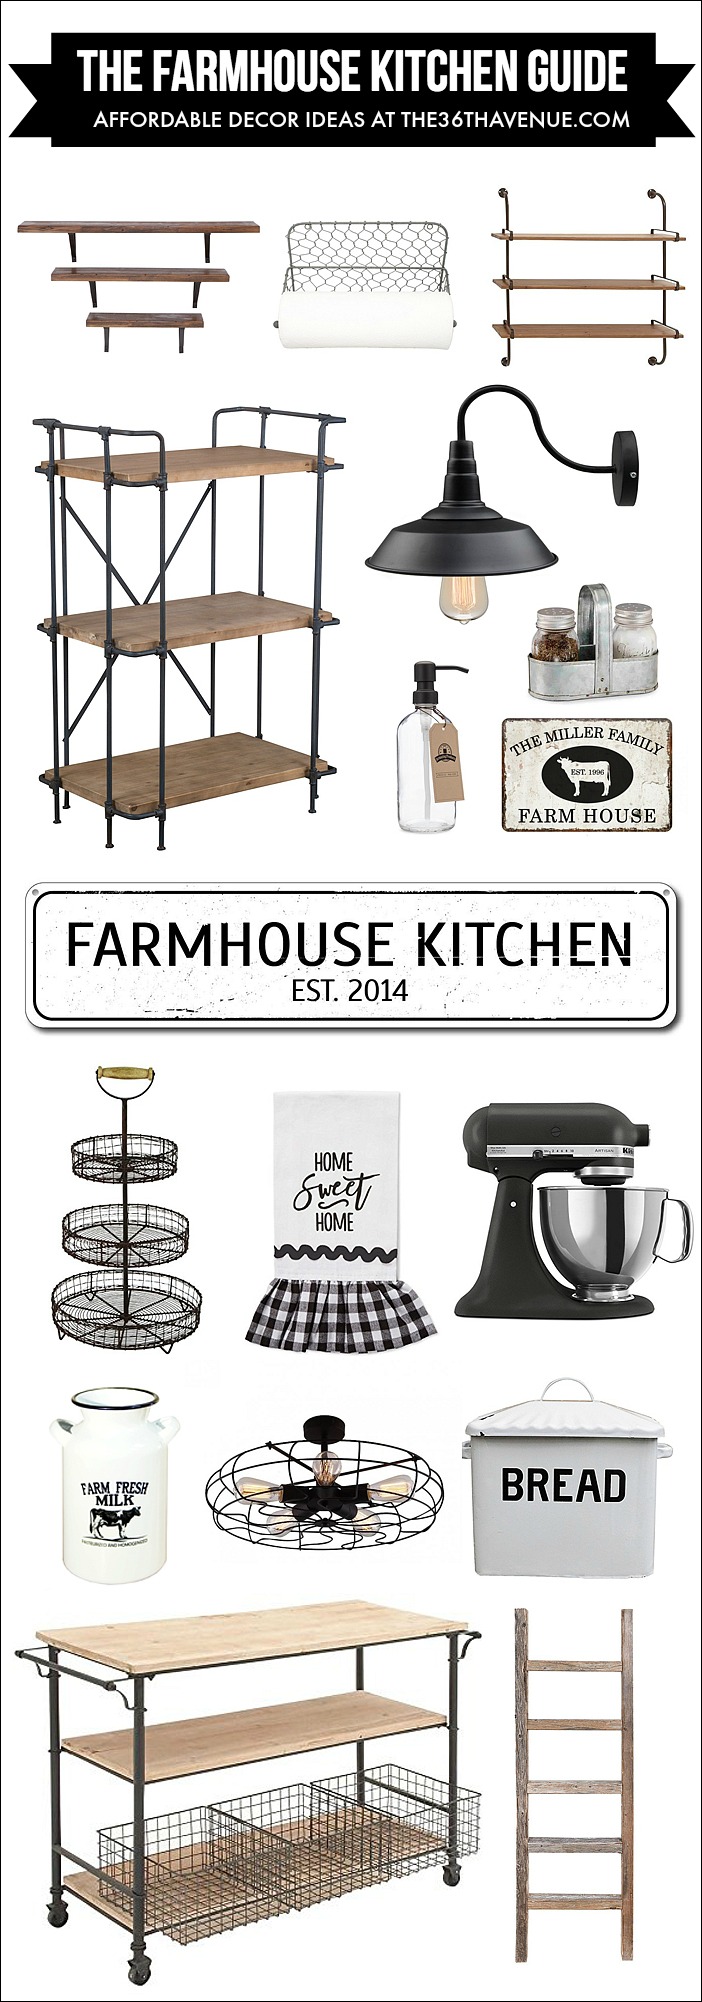 Kitchen Farmhouse Decor Ideas that are affordable and for sure perfect additions to your farmhouse decor.